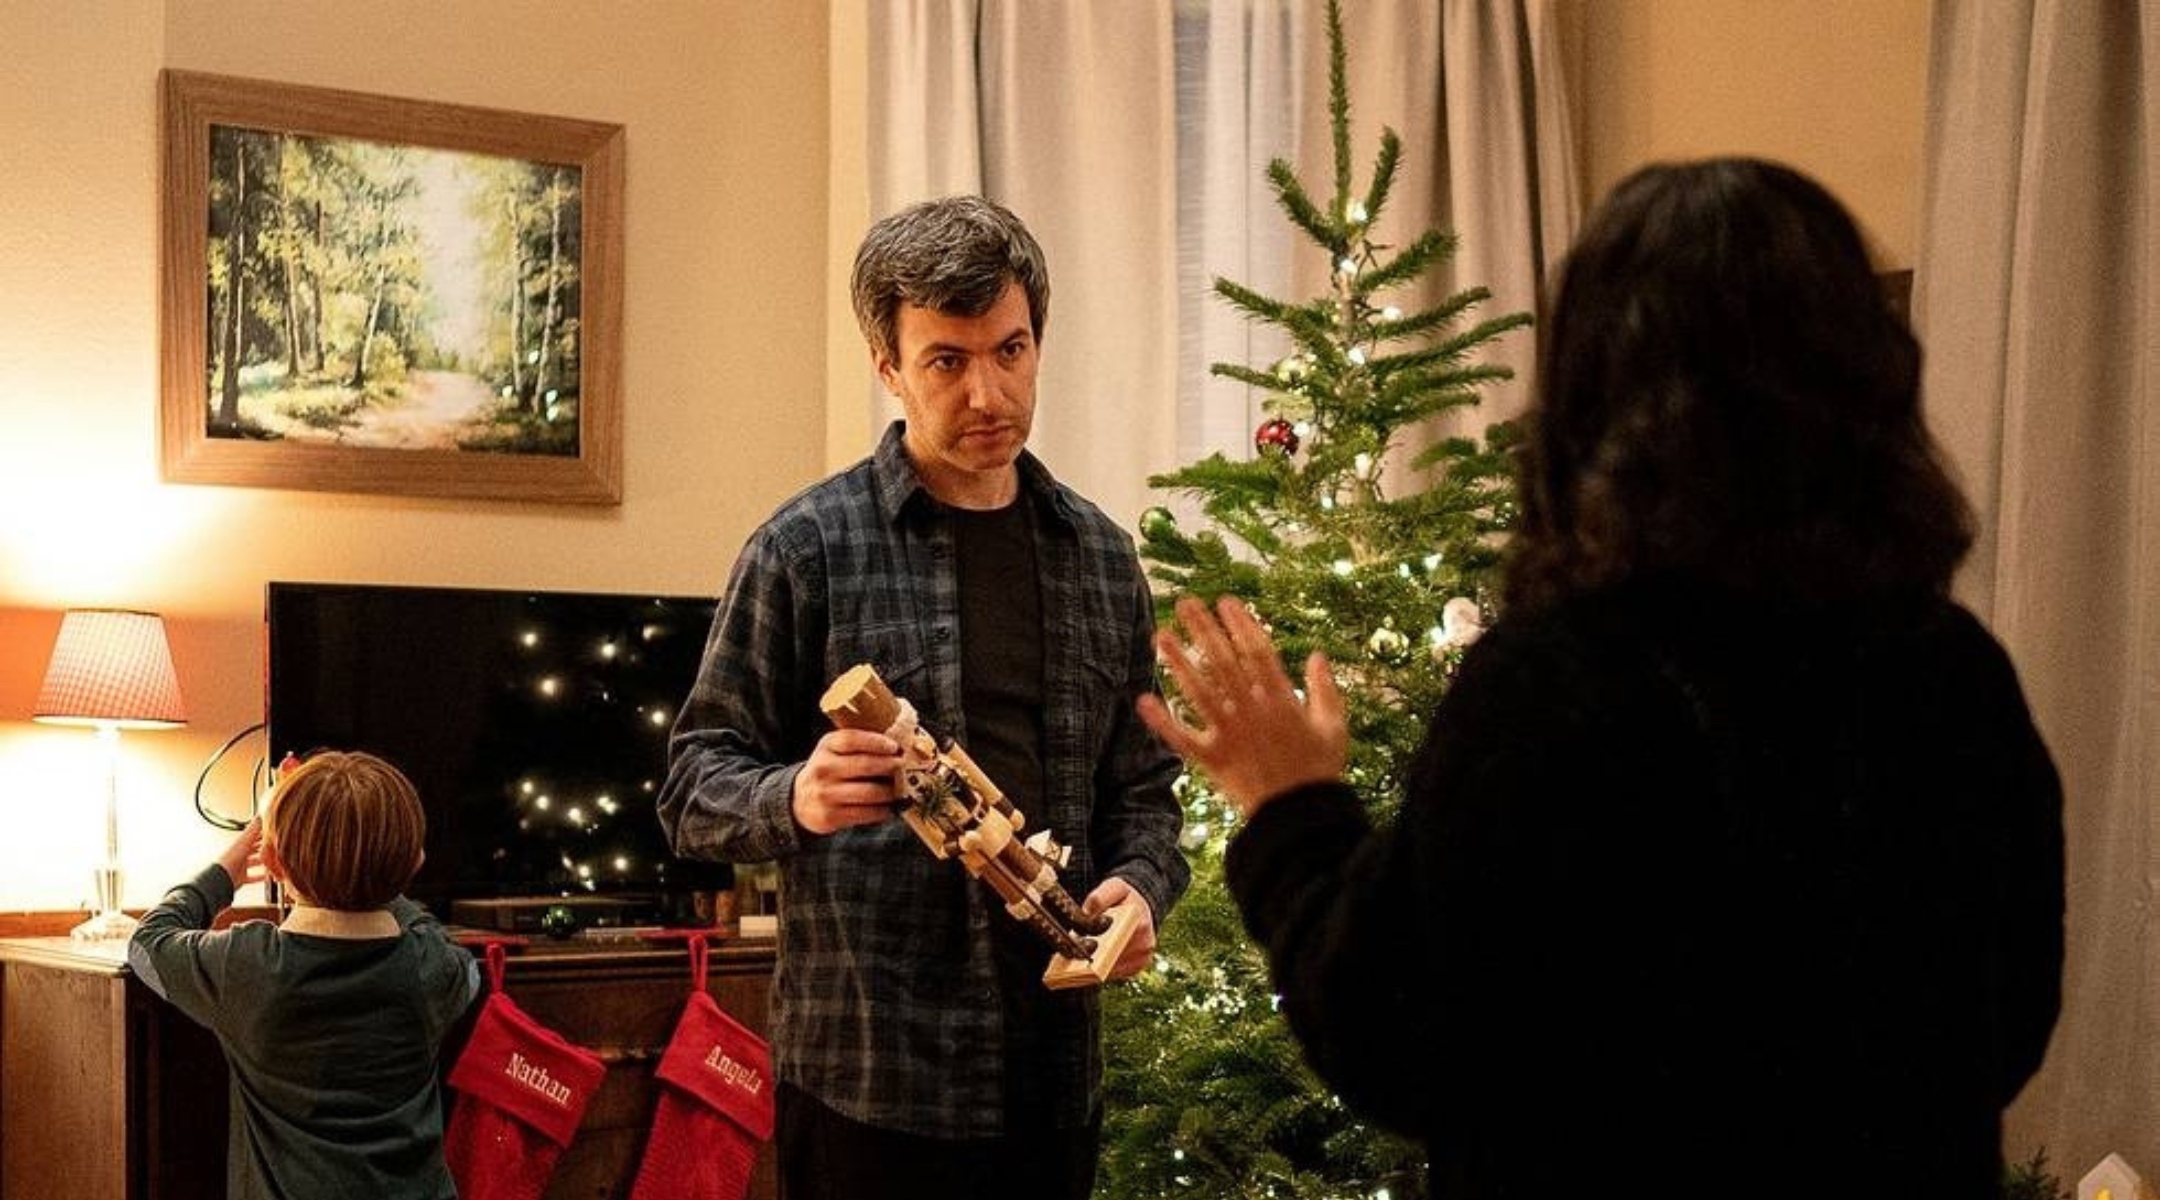 Nathan Fielder’s HBO show ‘The Rehearsal’ offers an unusual portrayal of interfaith parenting gone wrong